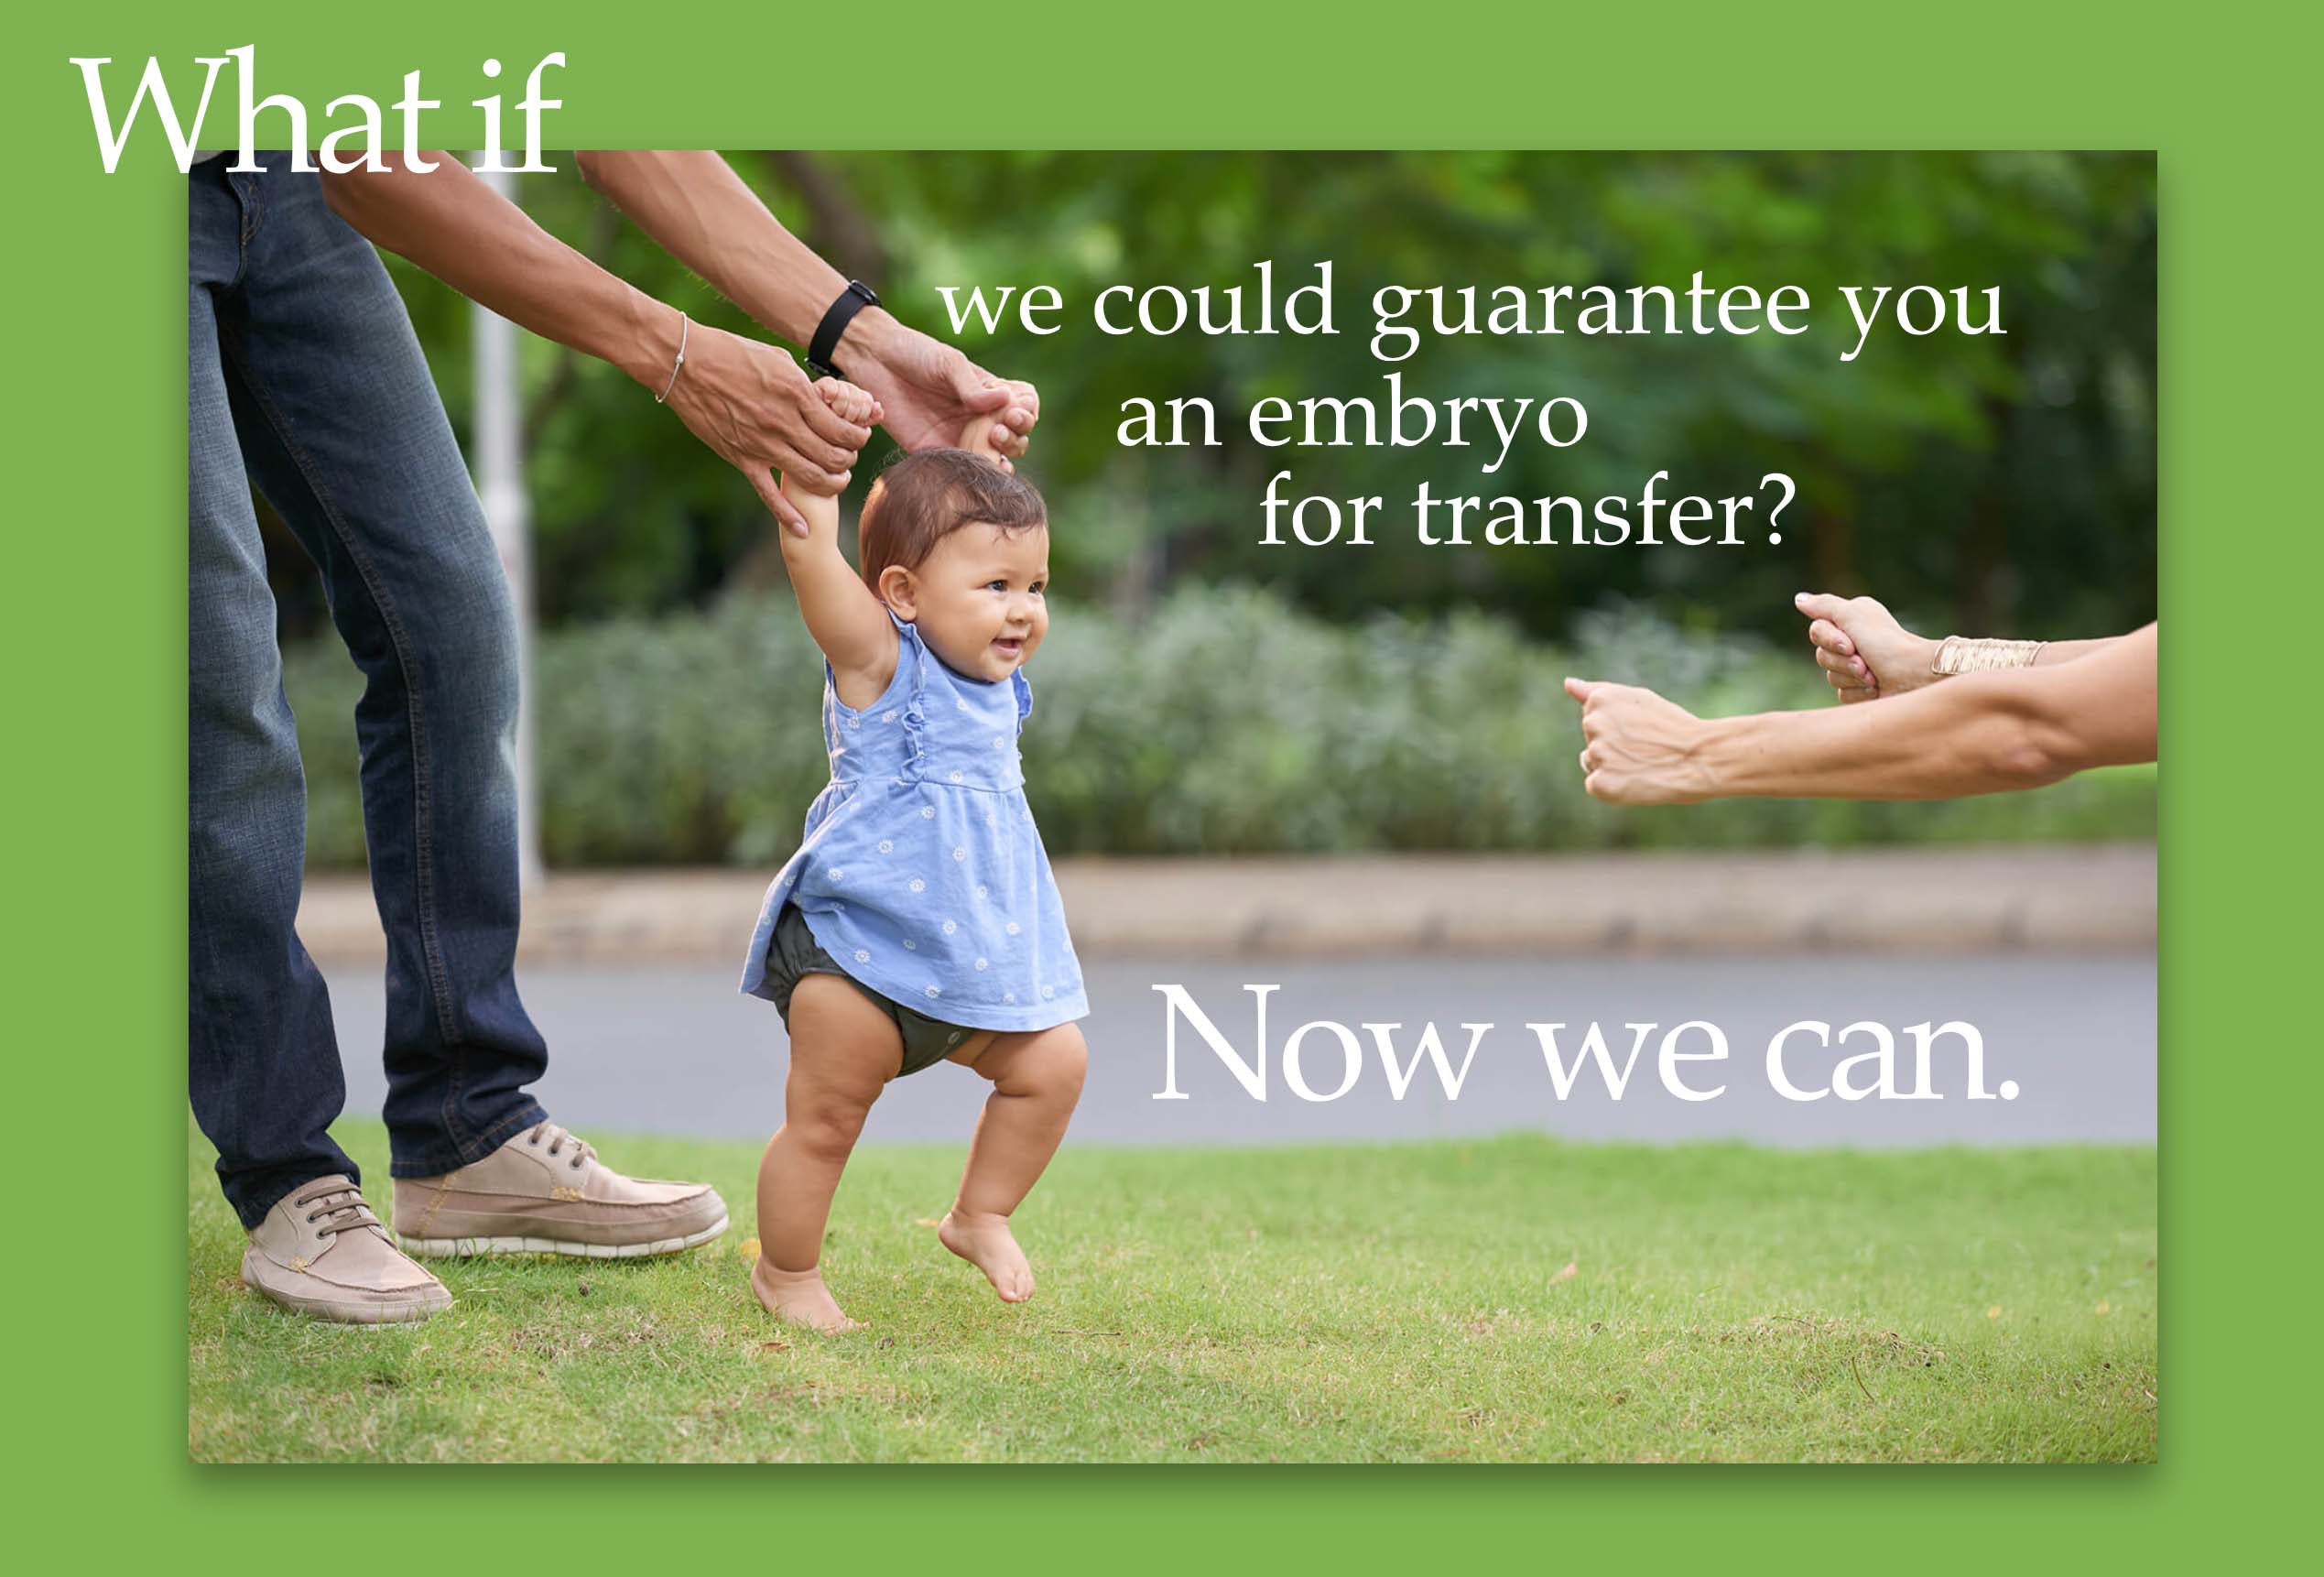 What if we could guarantee you an embryo for transfer?